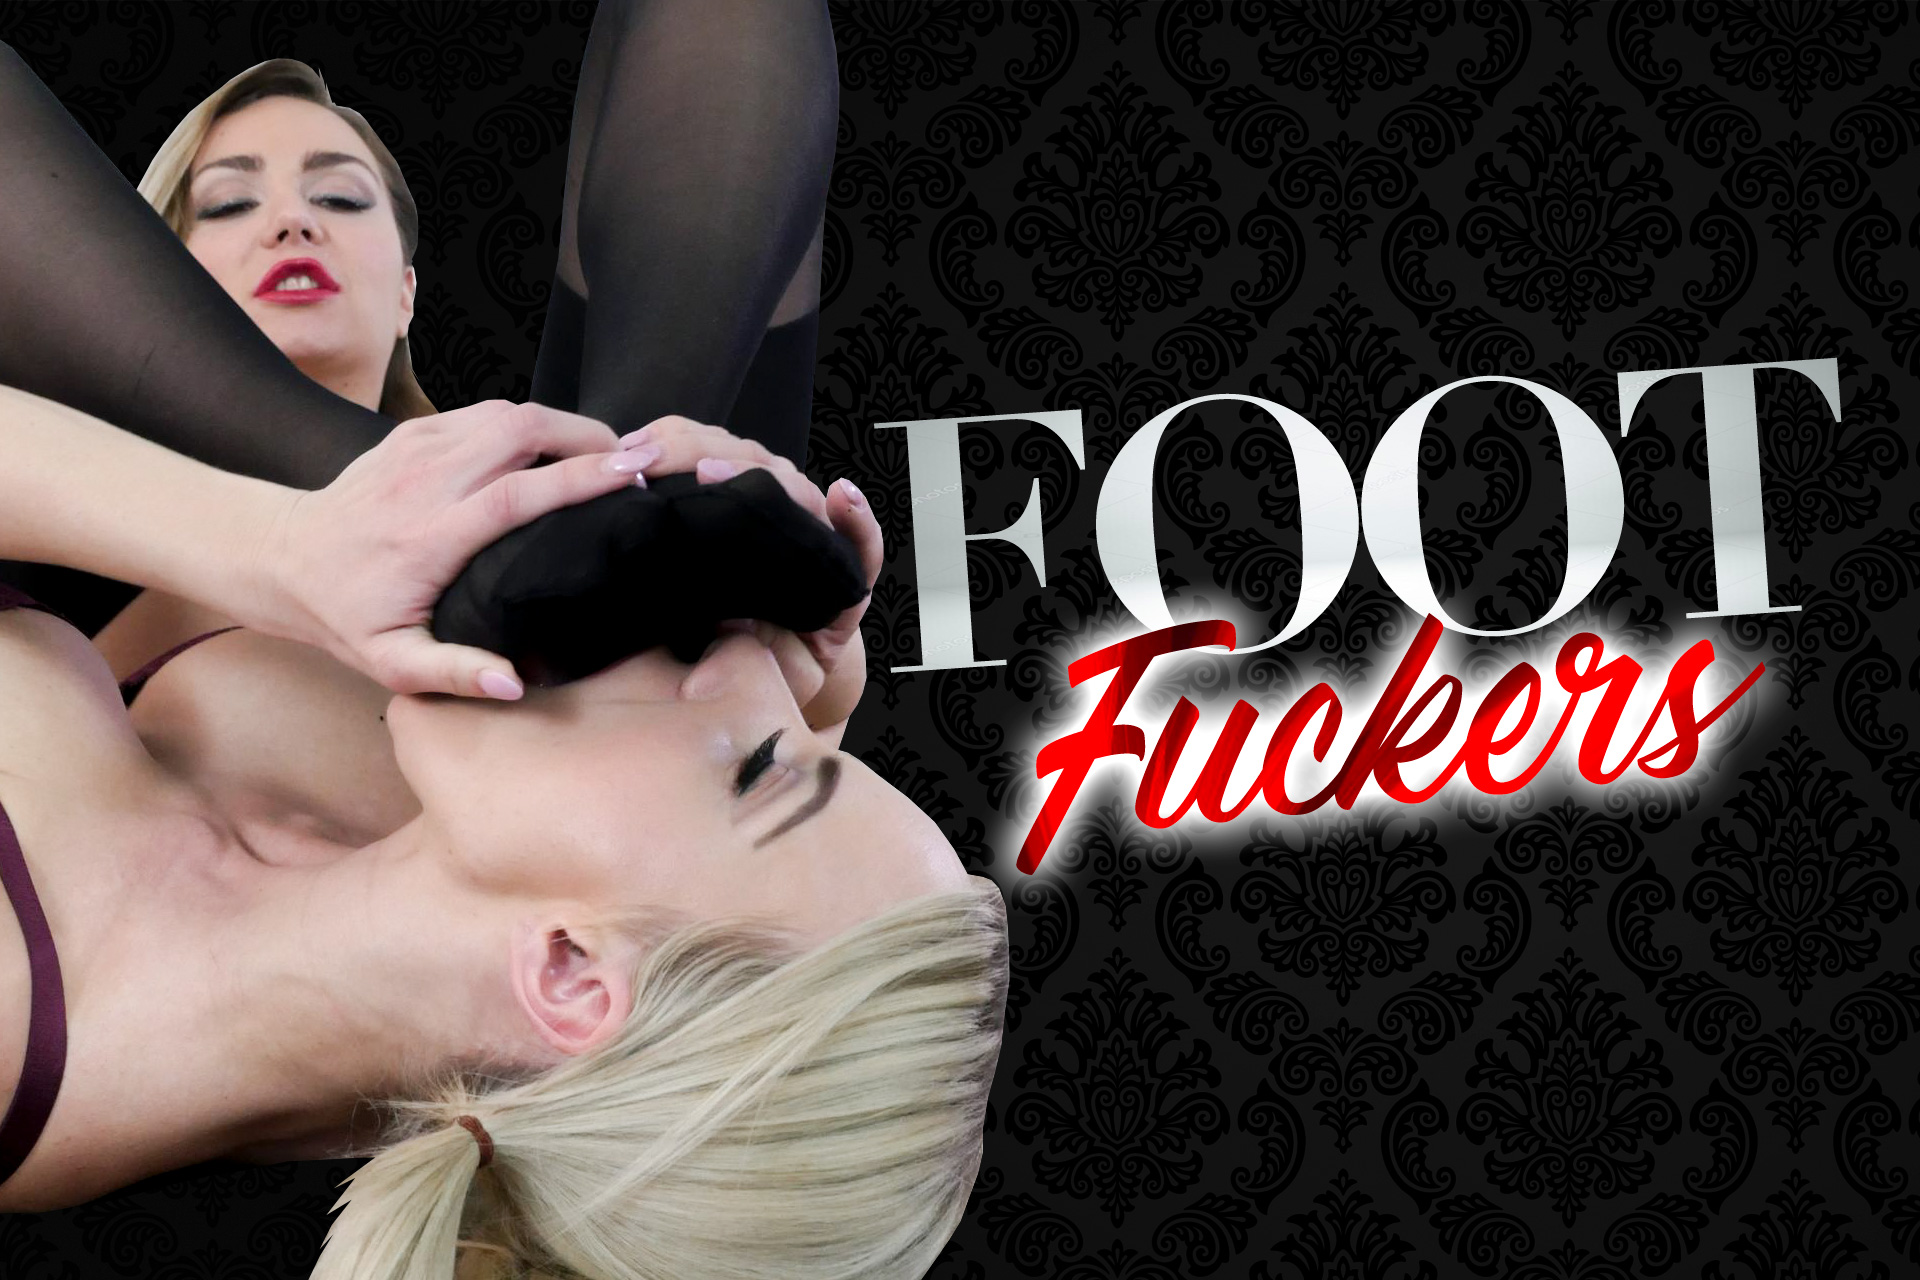 Foot Fetish Sex starring Nathaly Cherie and Victoria Puppy